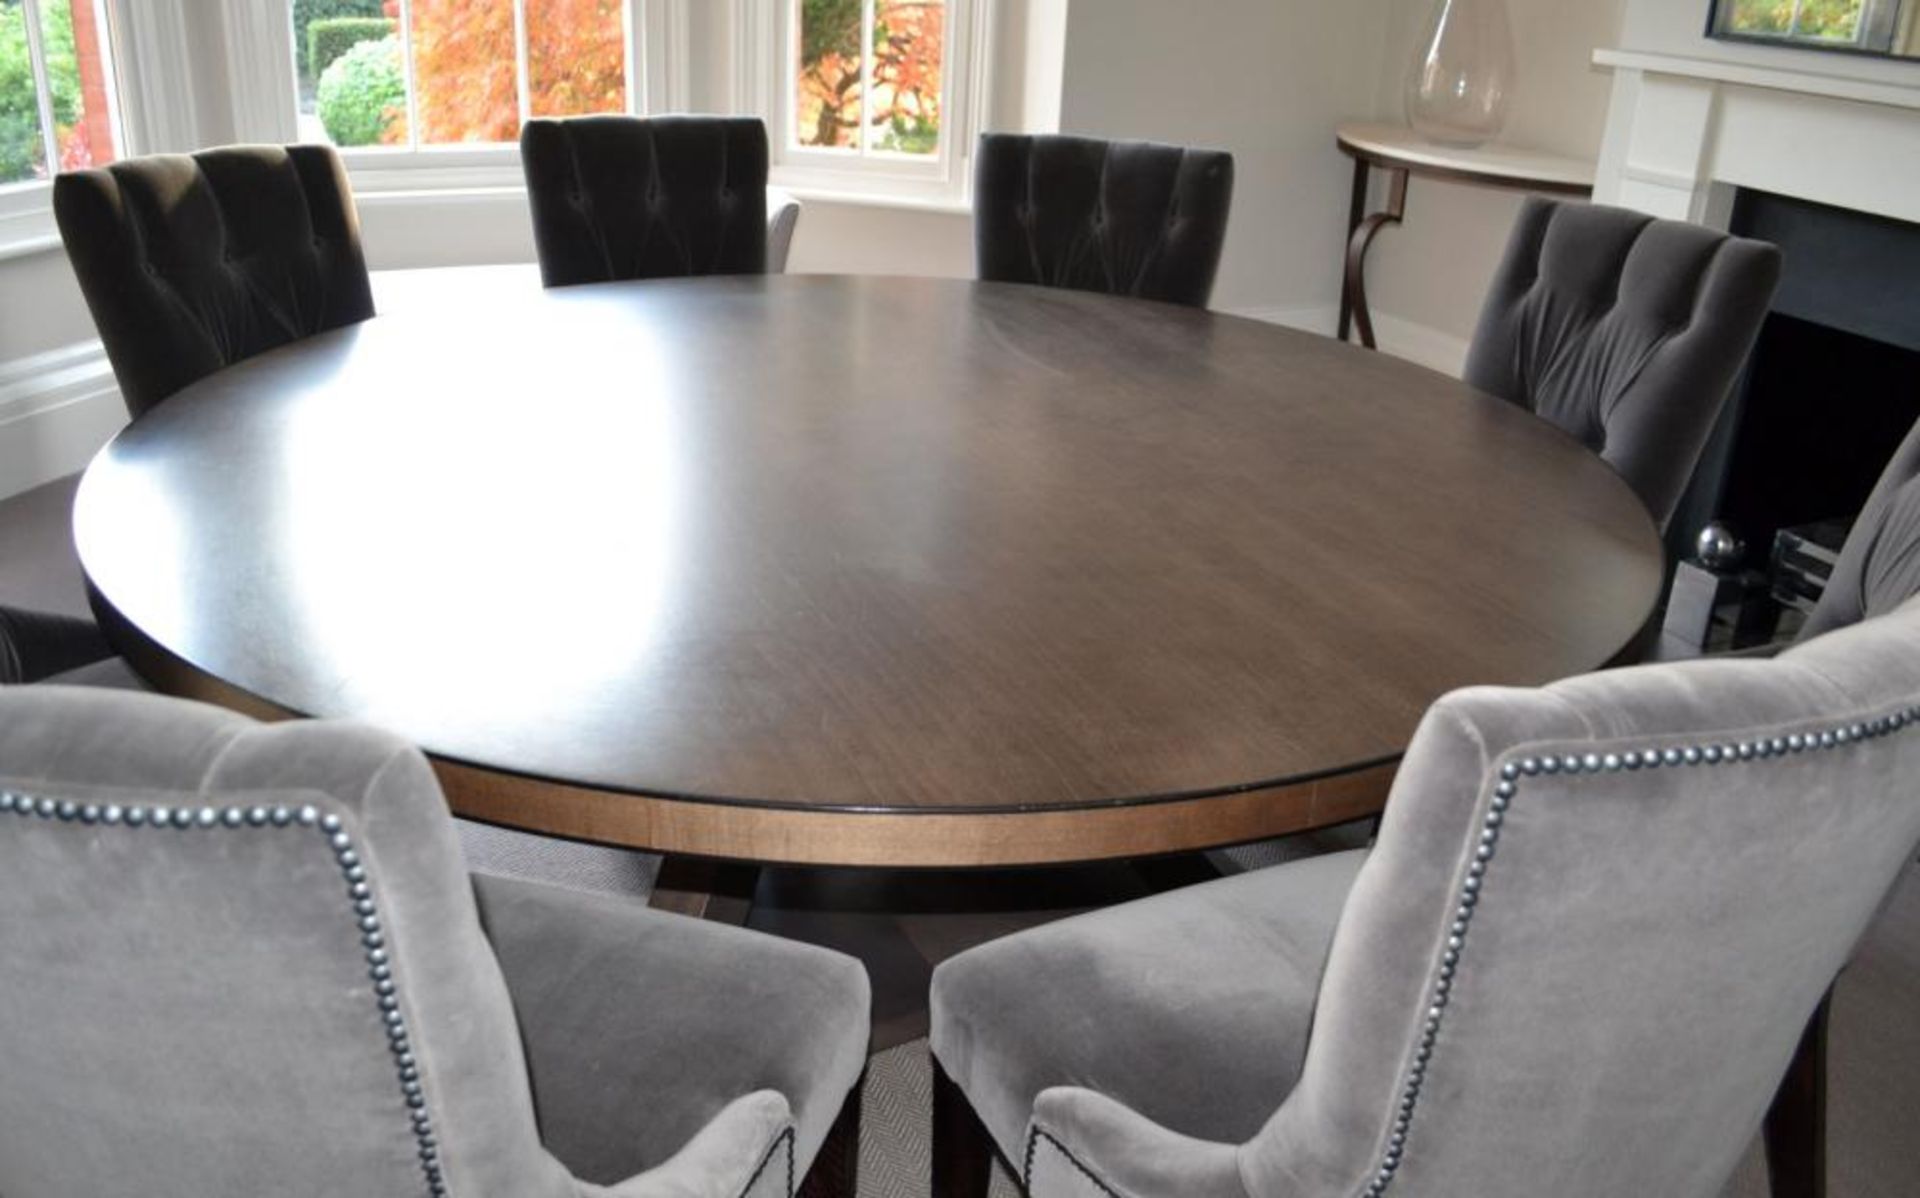 1 x Bespoke Round Dining Table With Sycamore Wood Finish - Includes Set of Six Grey Button Back - Image 20 of 20